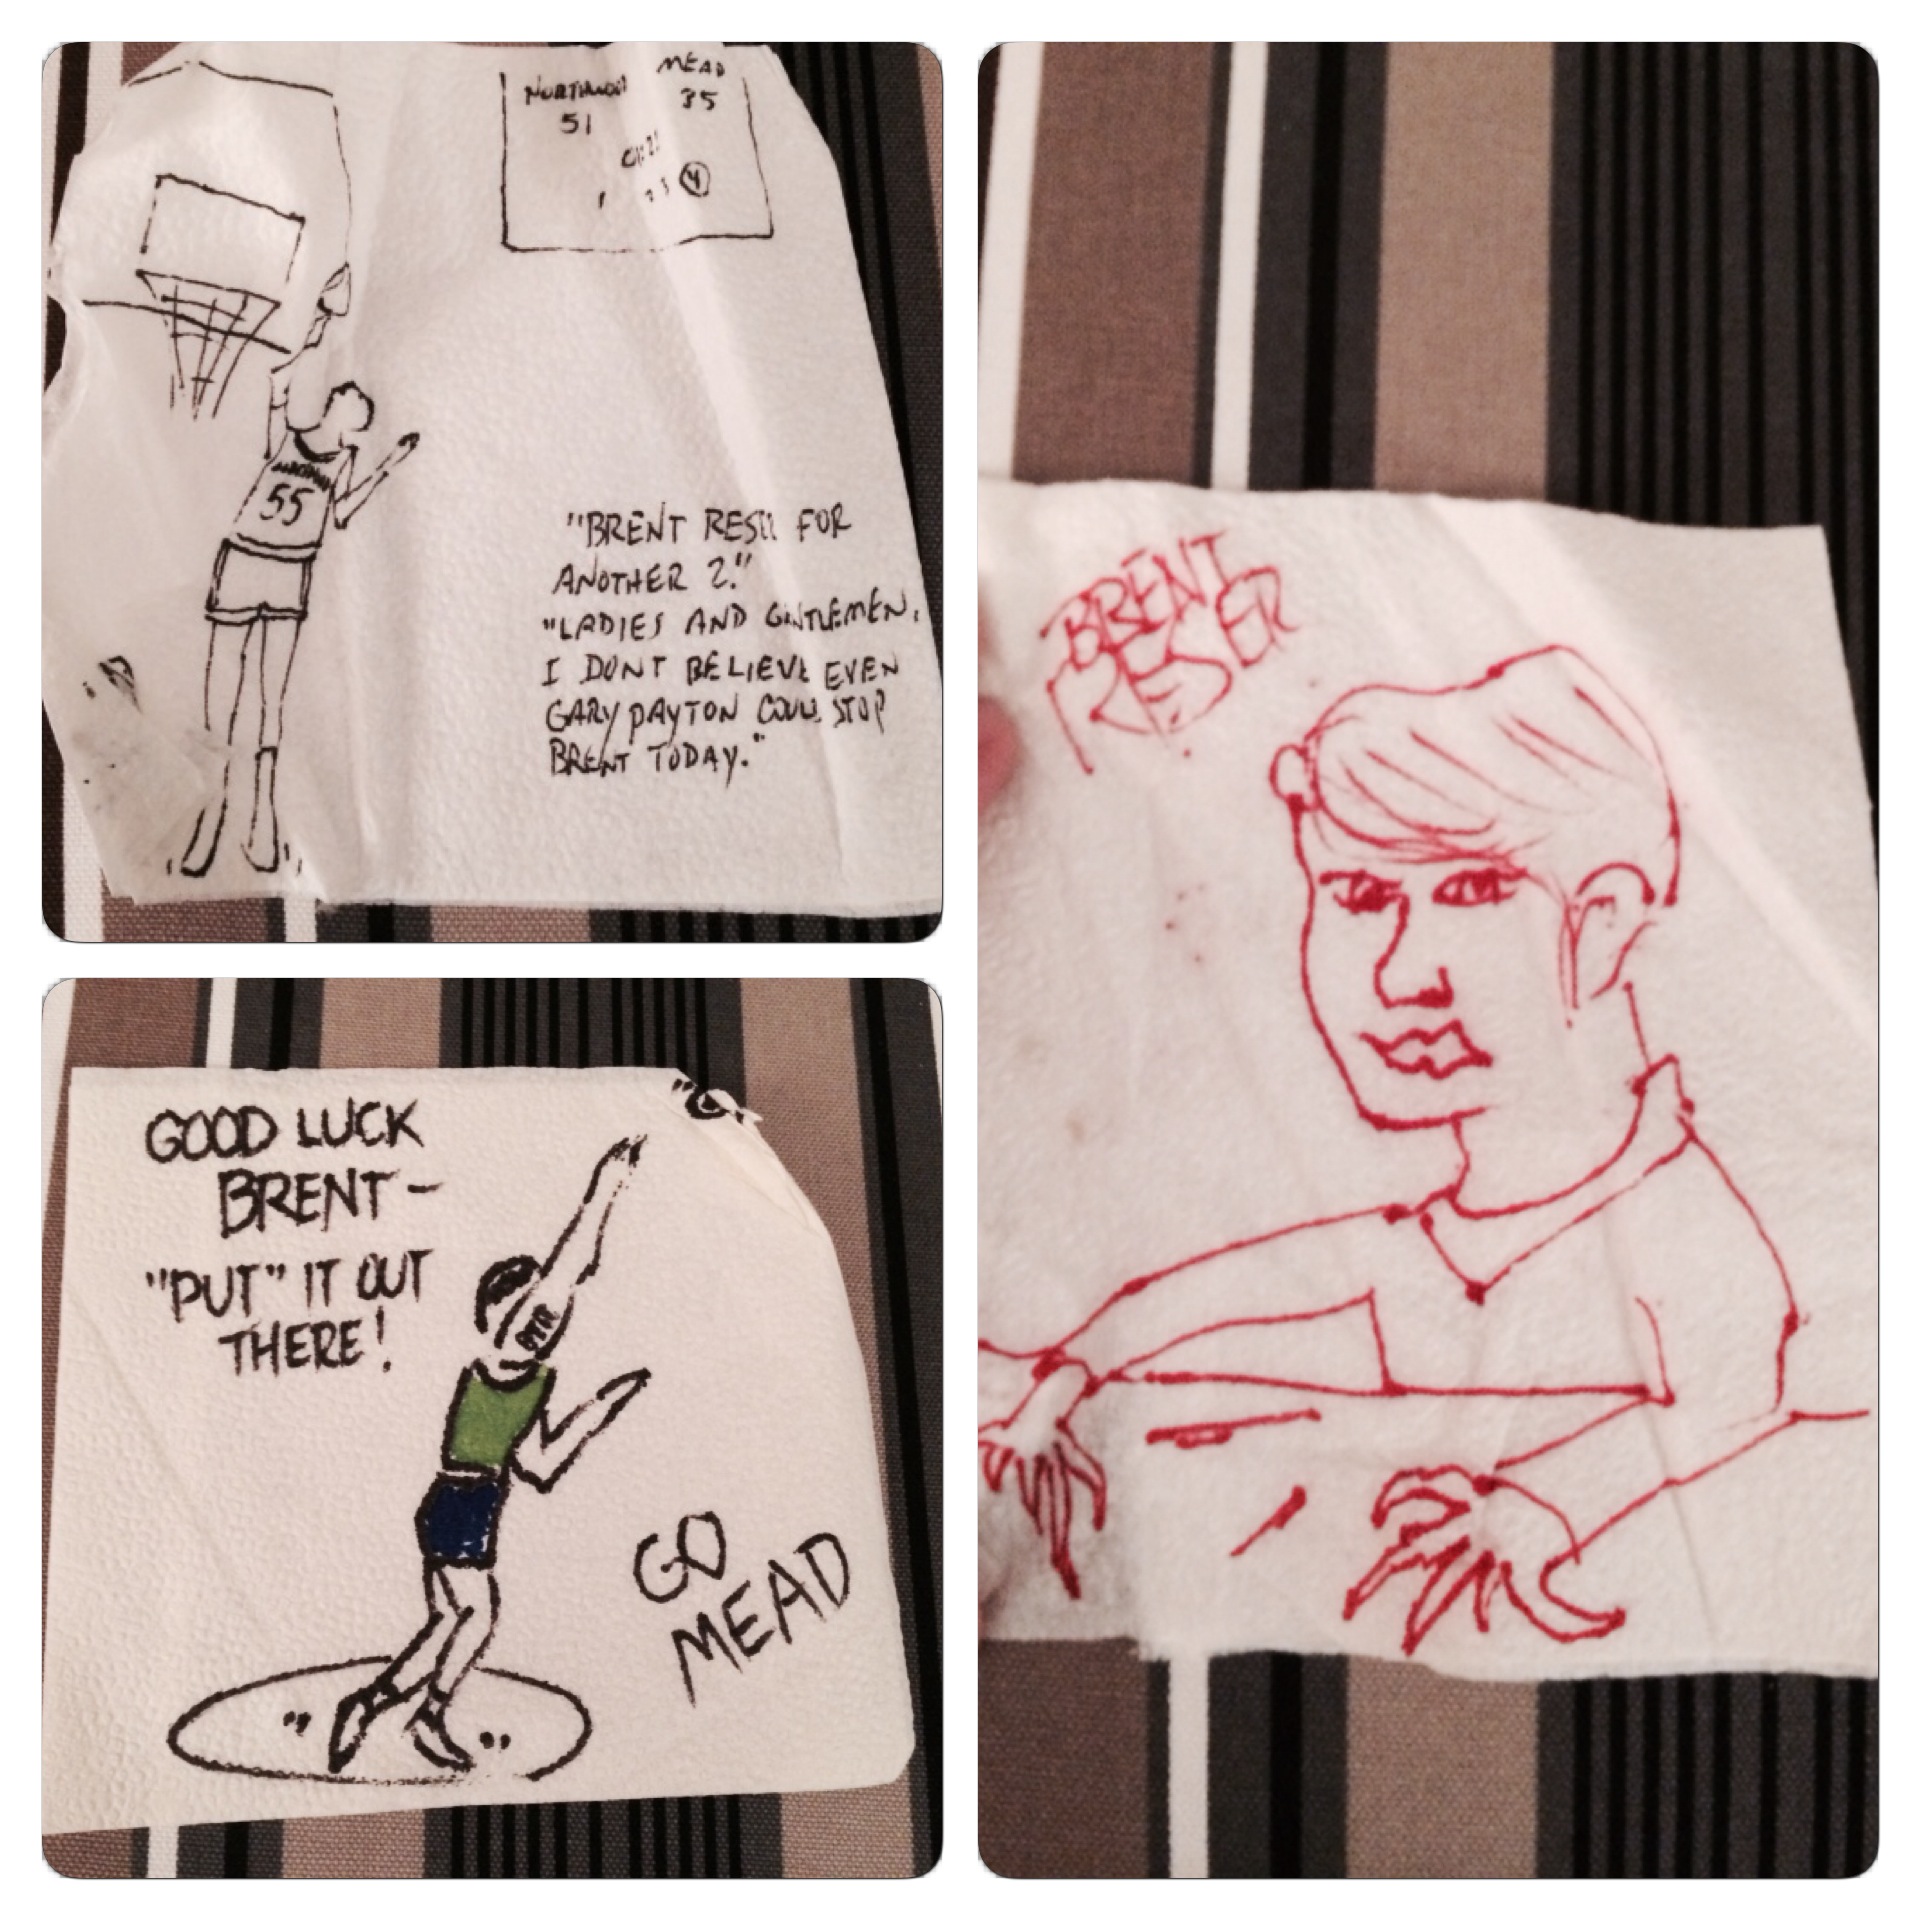 Here is some of my dad's napkin art.